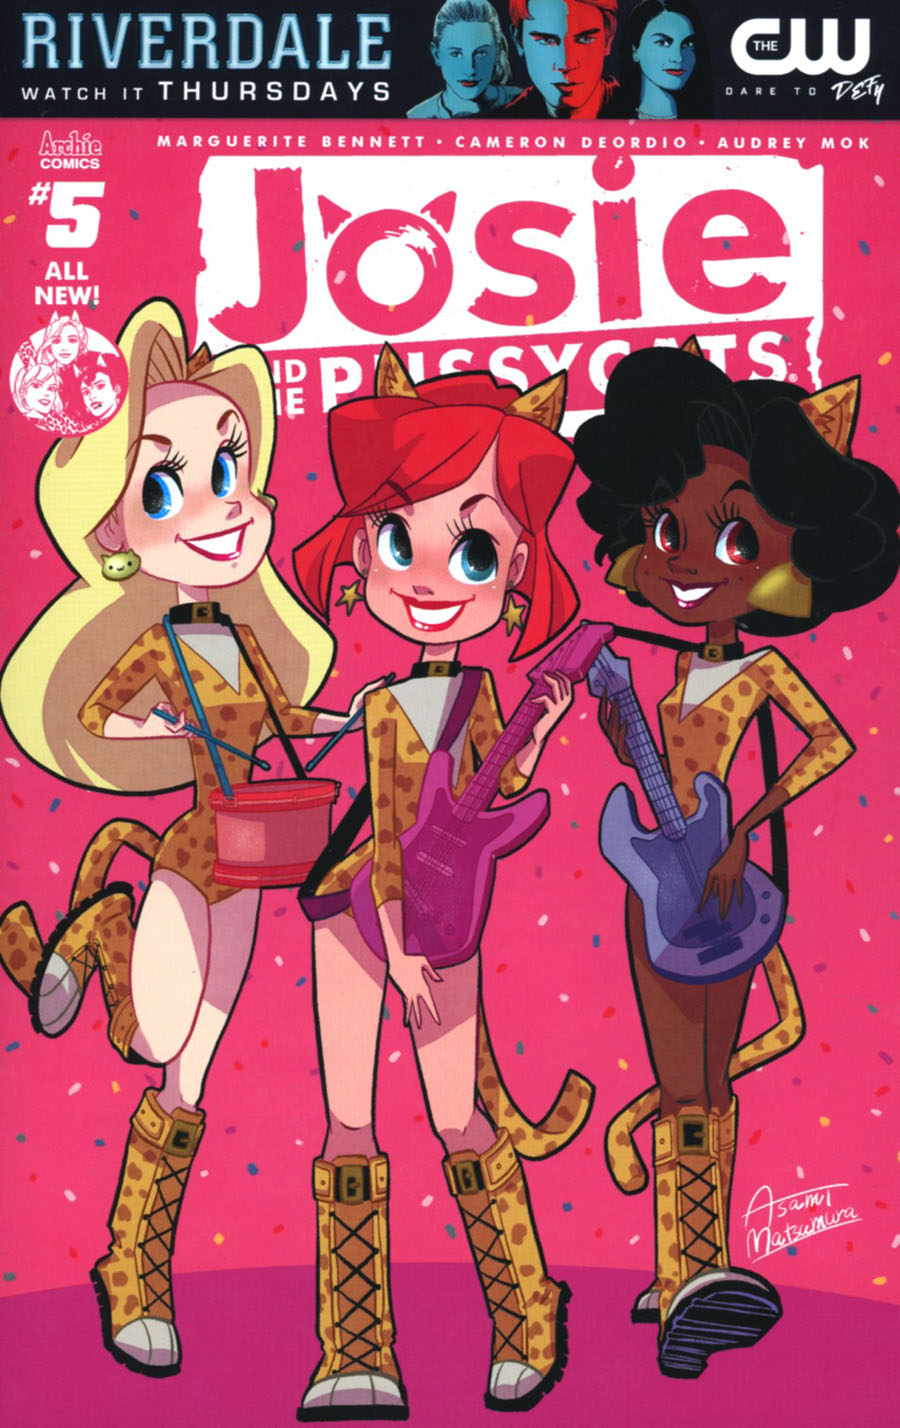 Josie And The Pussycats Vol 2 #5 Cover B Variant Asami Matsumura Cover